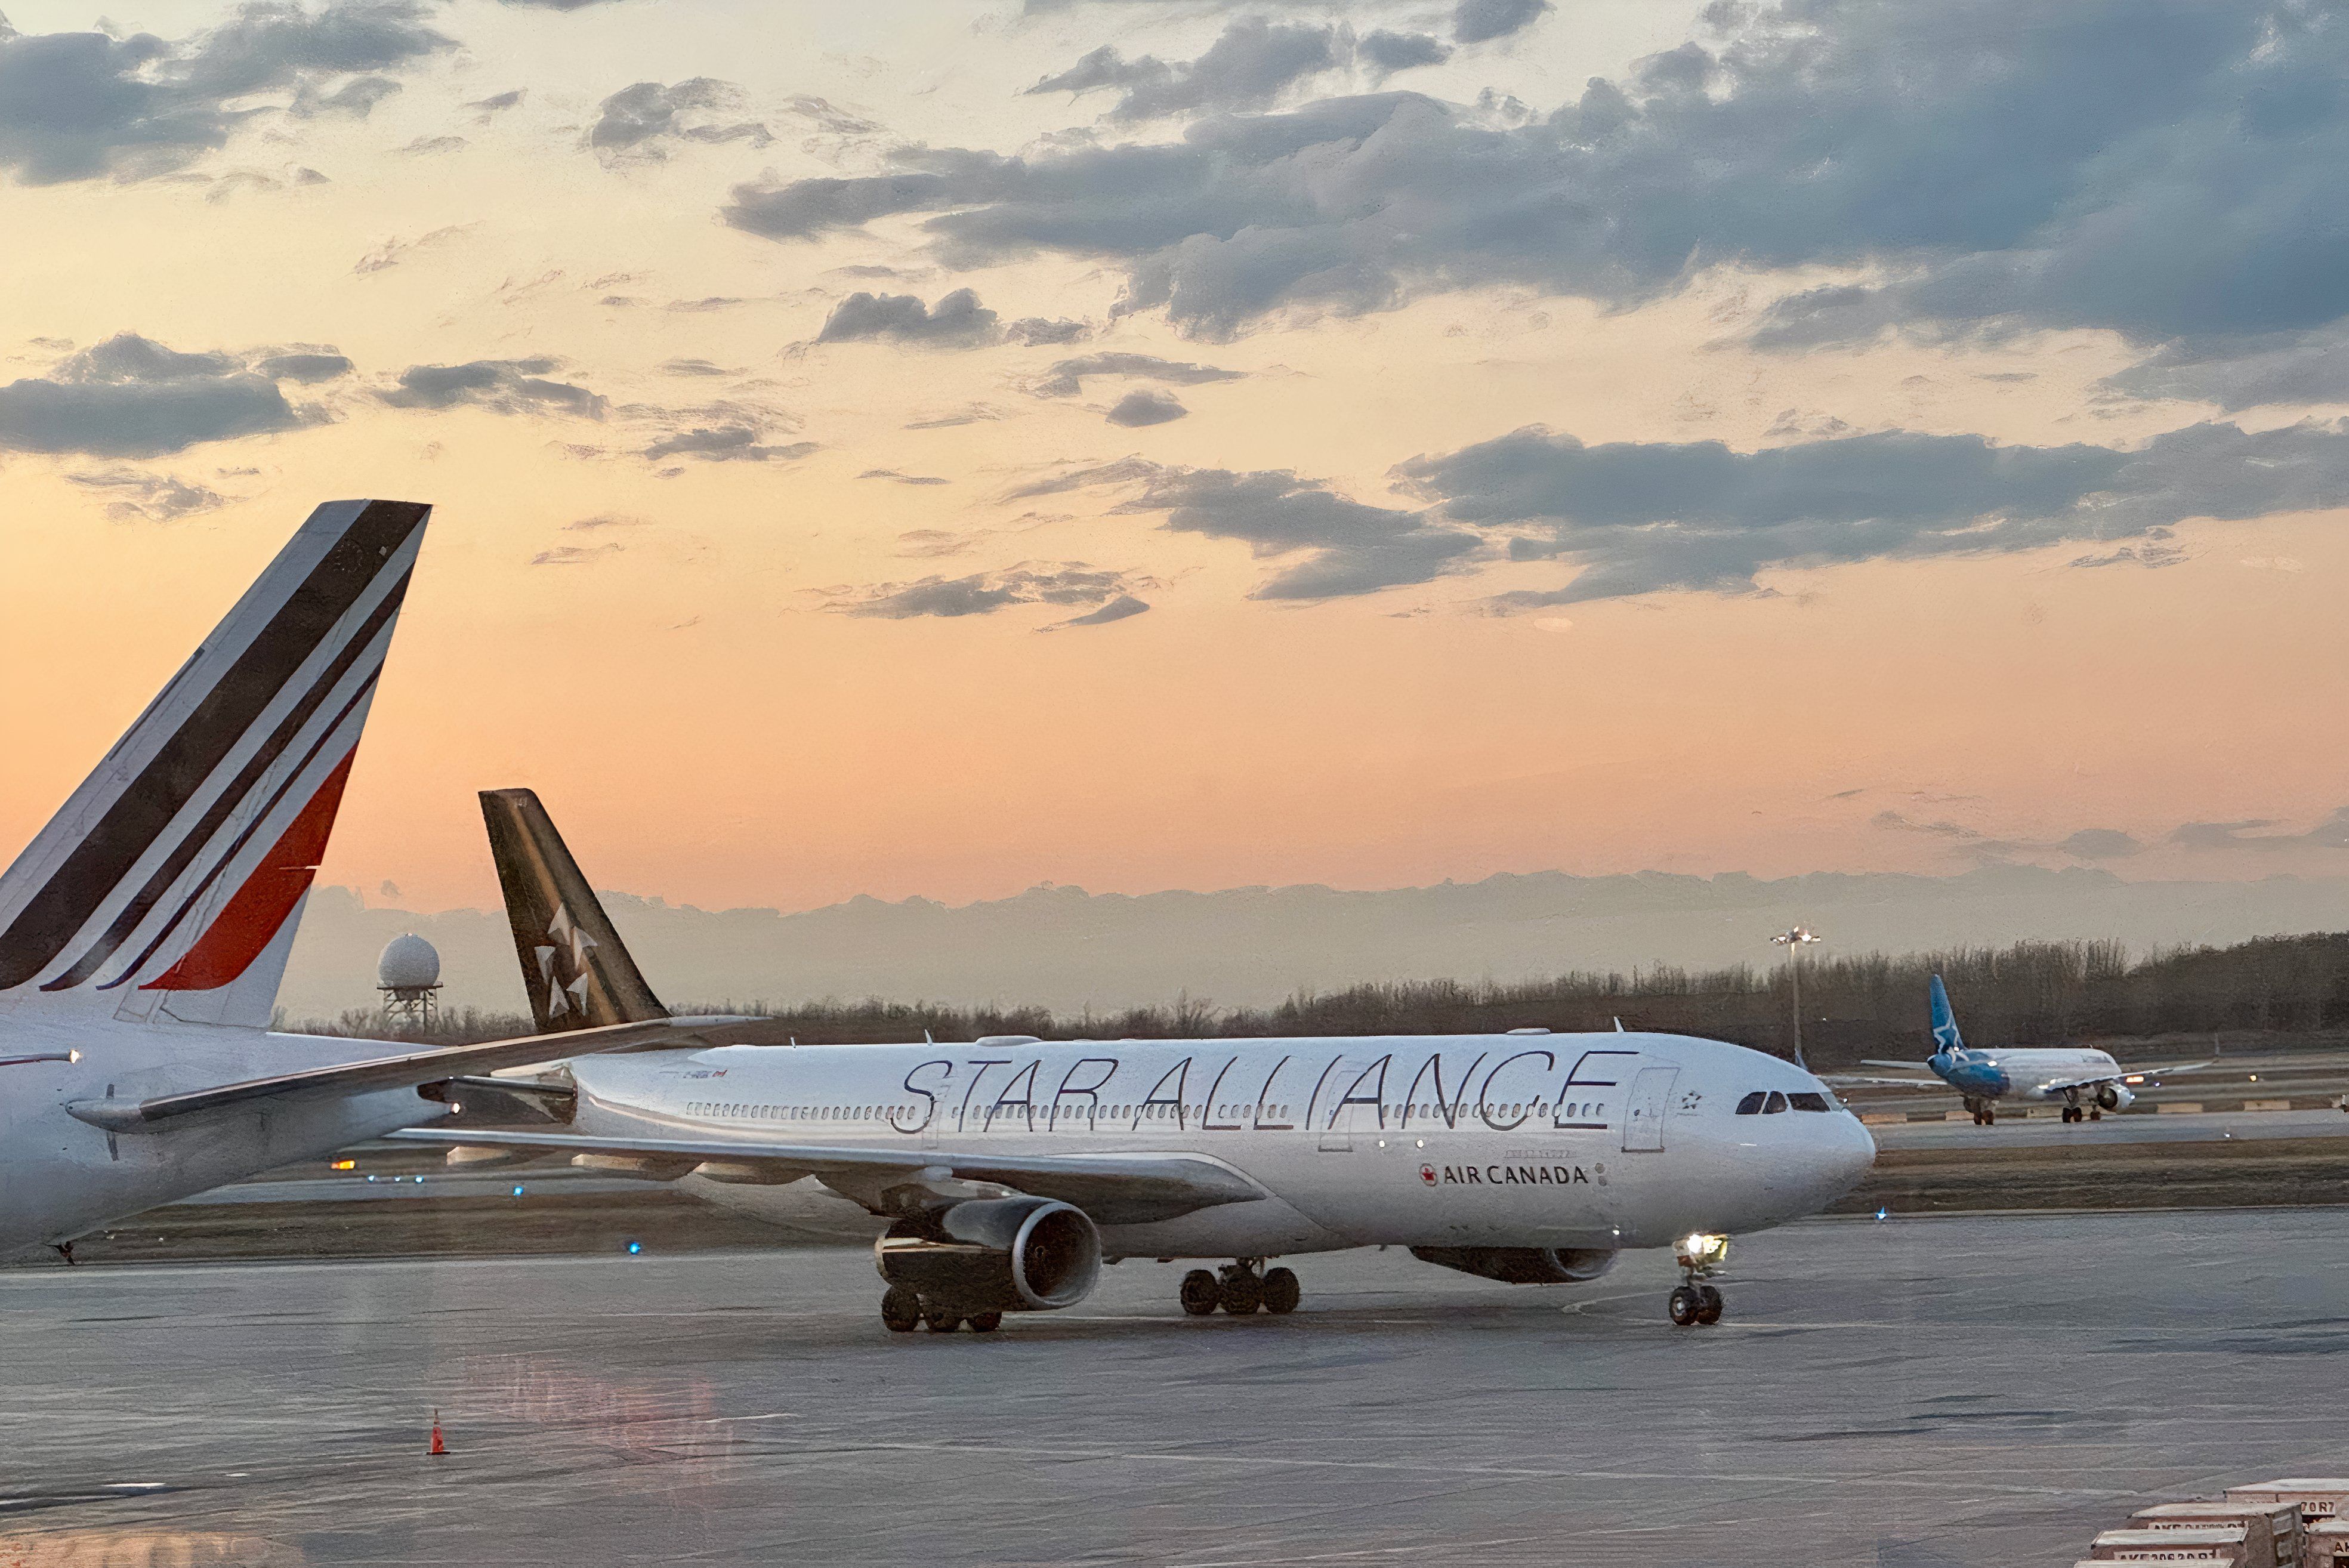 An Air Canada plane in the Star Alliance livery next to and Air France and Air Transat in the background